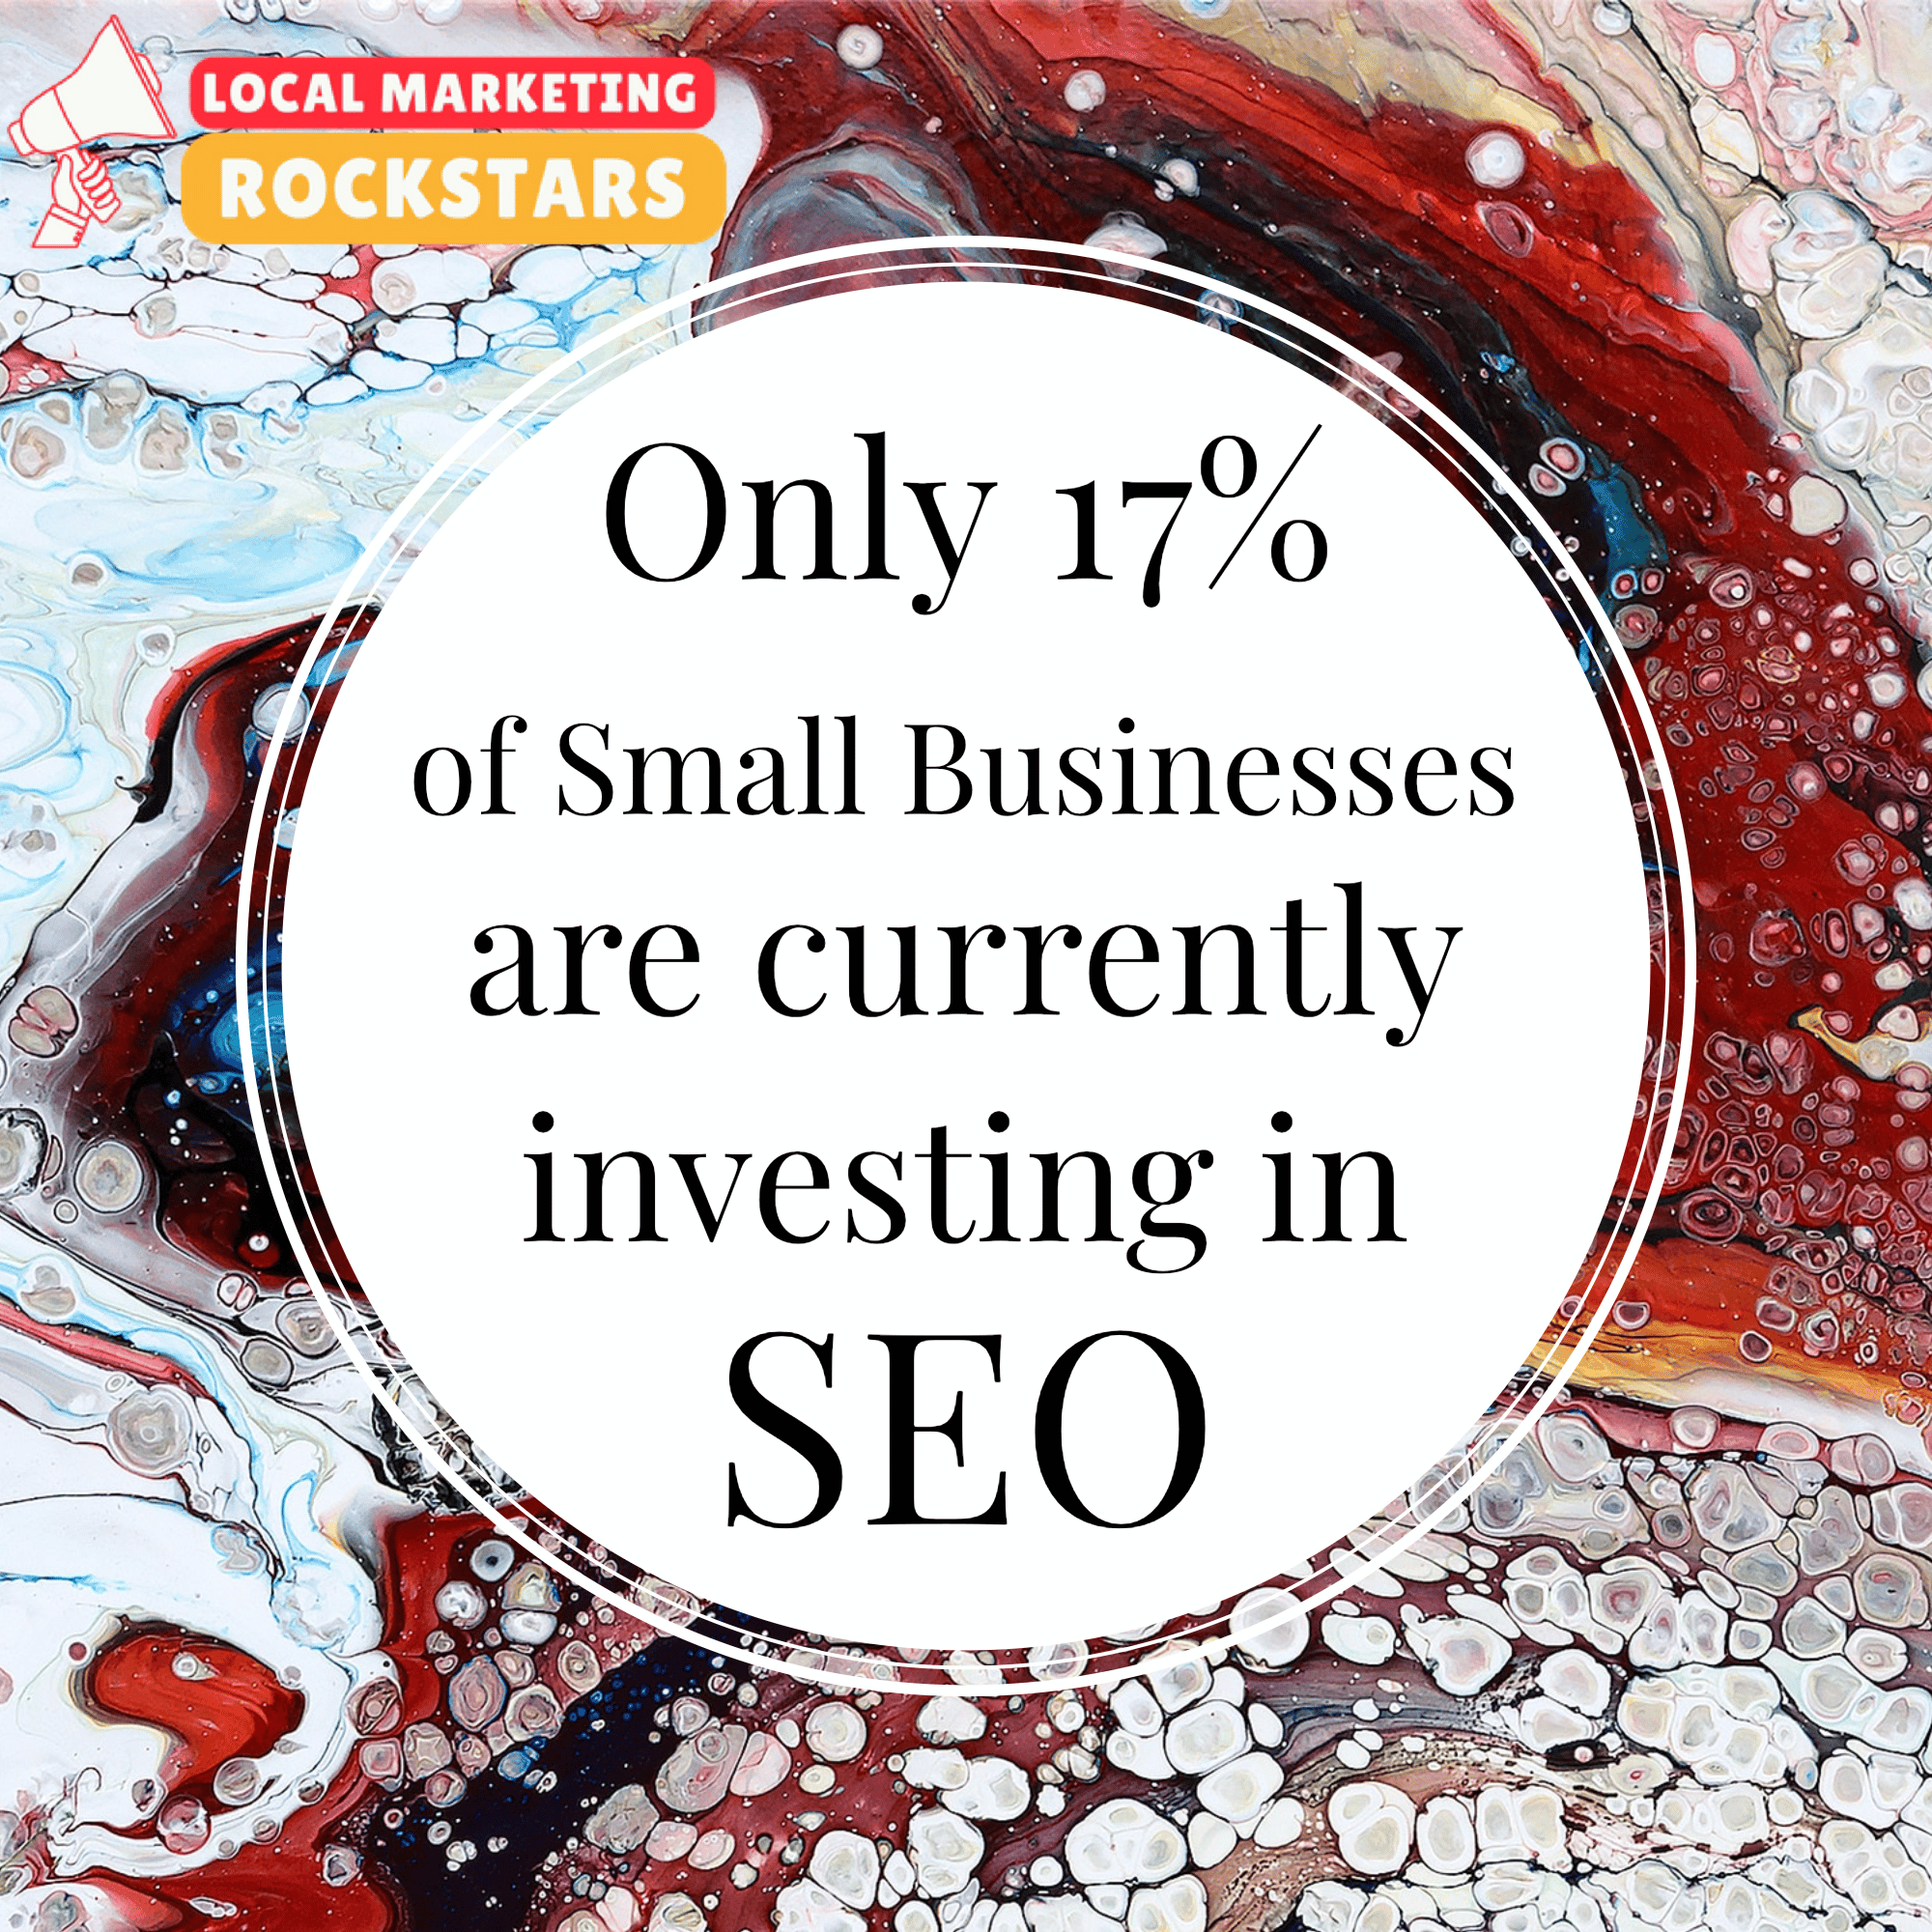 Only 17% of Small Businesses are currently investing in SEO